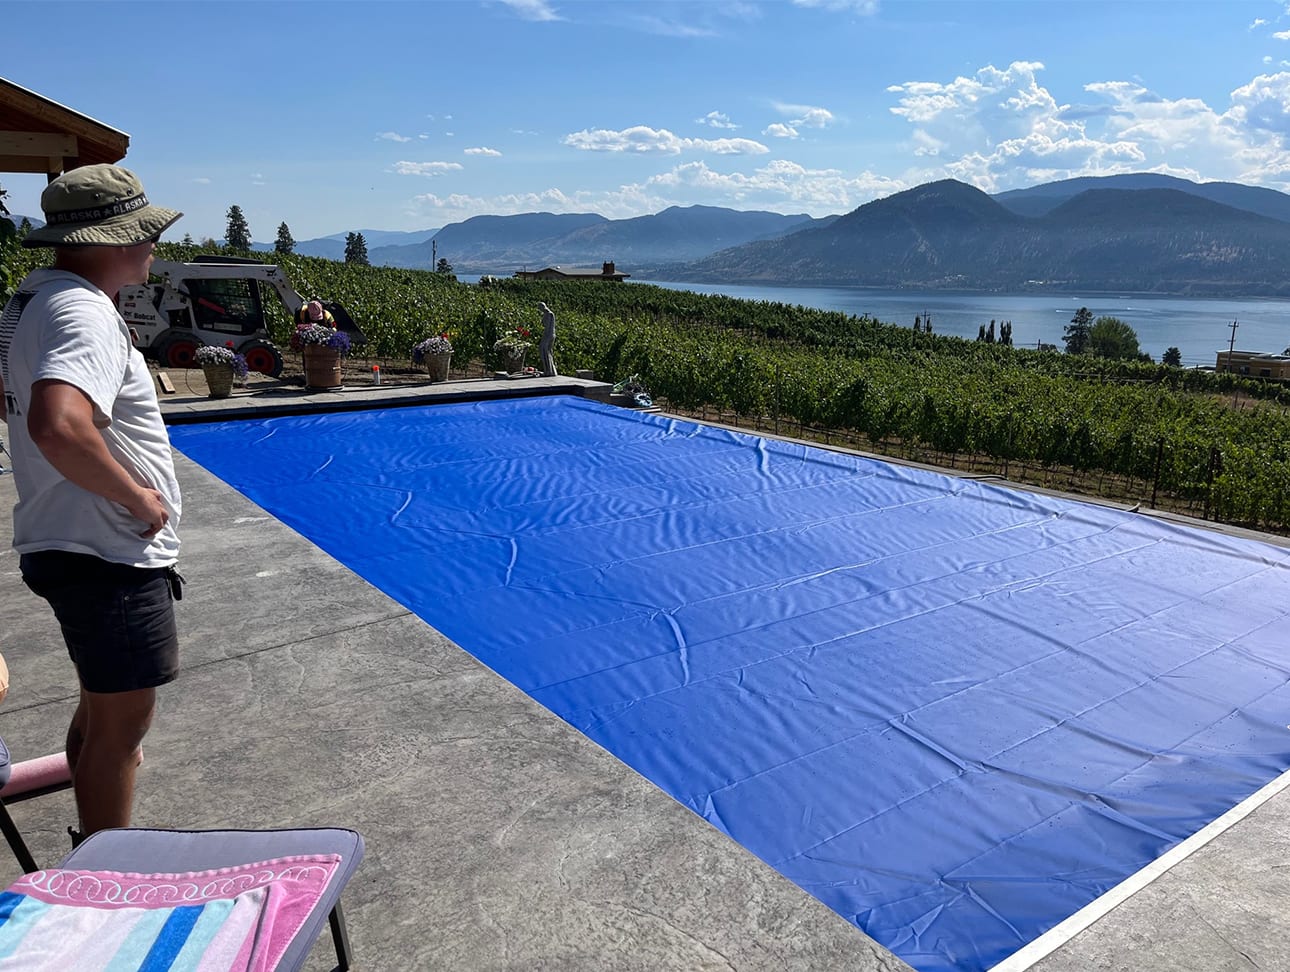 Pool Patrol was born and raised in B.C. The local pool cover company has raised the bar for the industry in western Canada since it started in 1995.